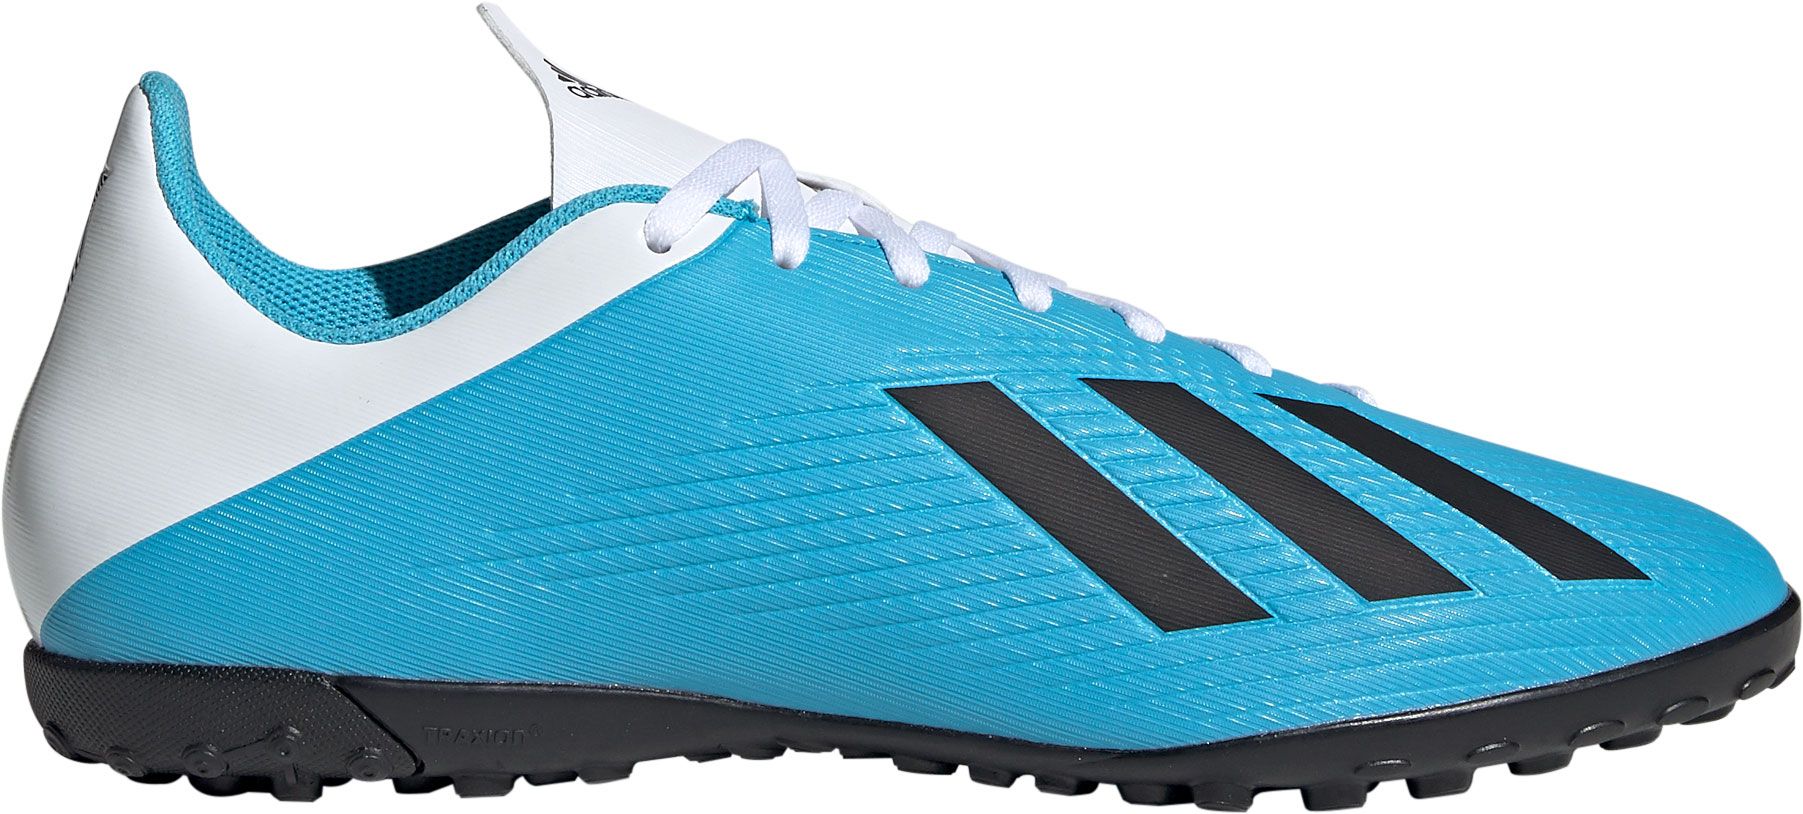 adidas soccer shoes blue